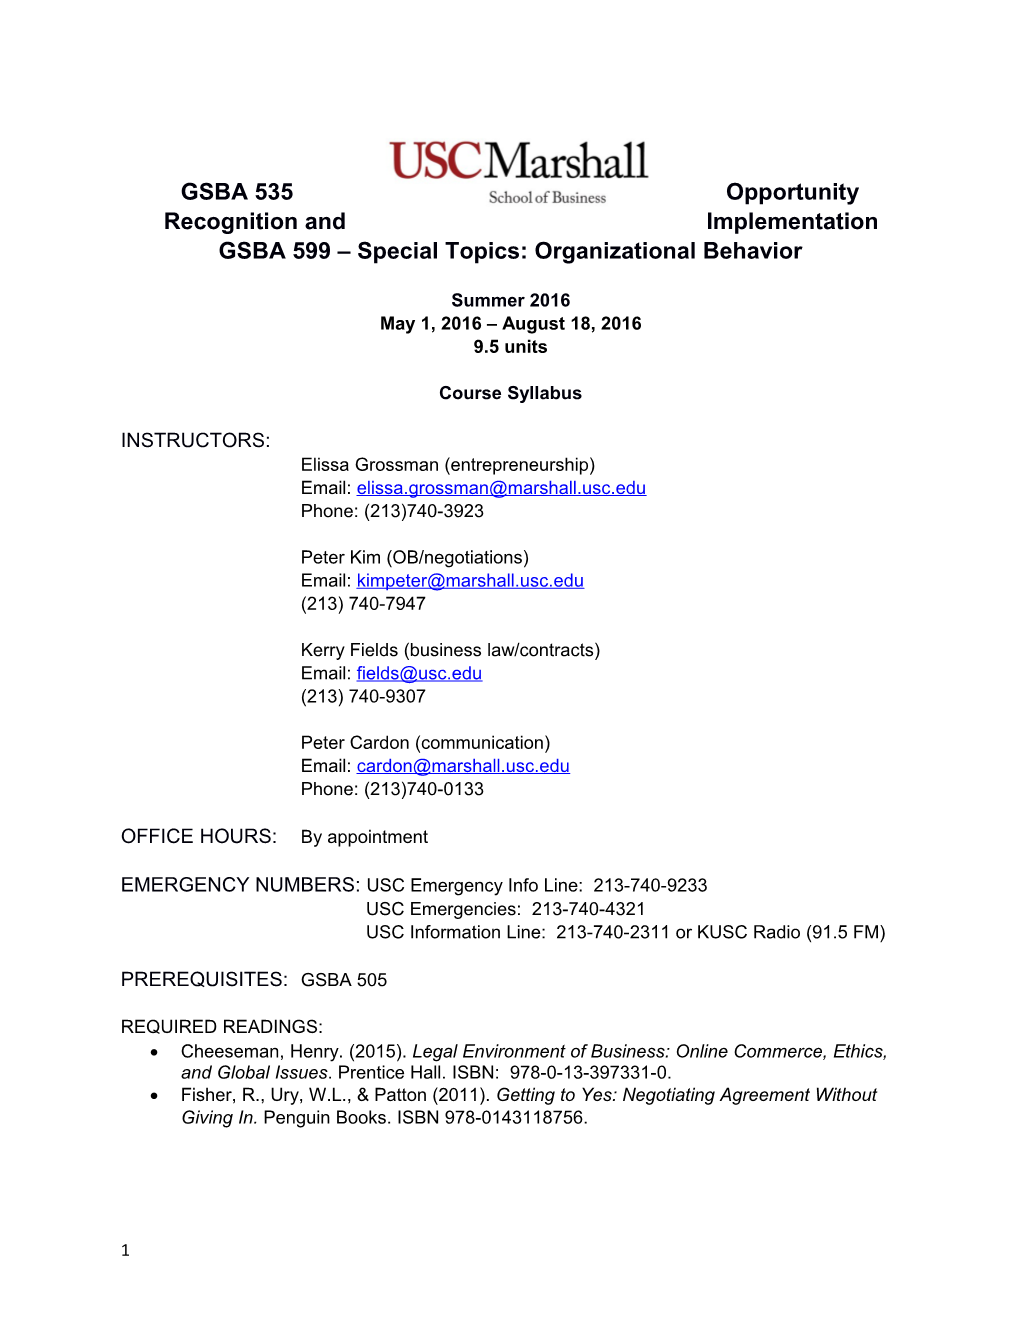 GSBA 535Opportunity Recognition and Implementation